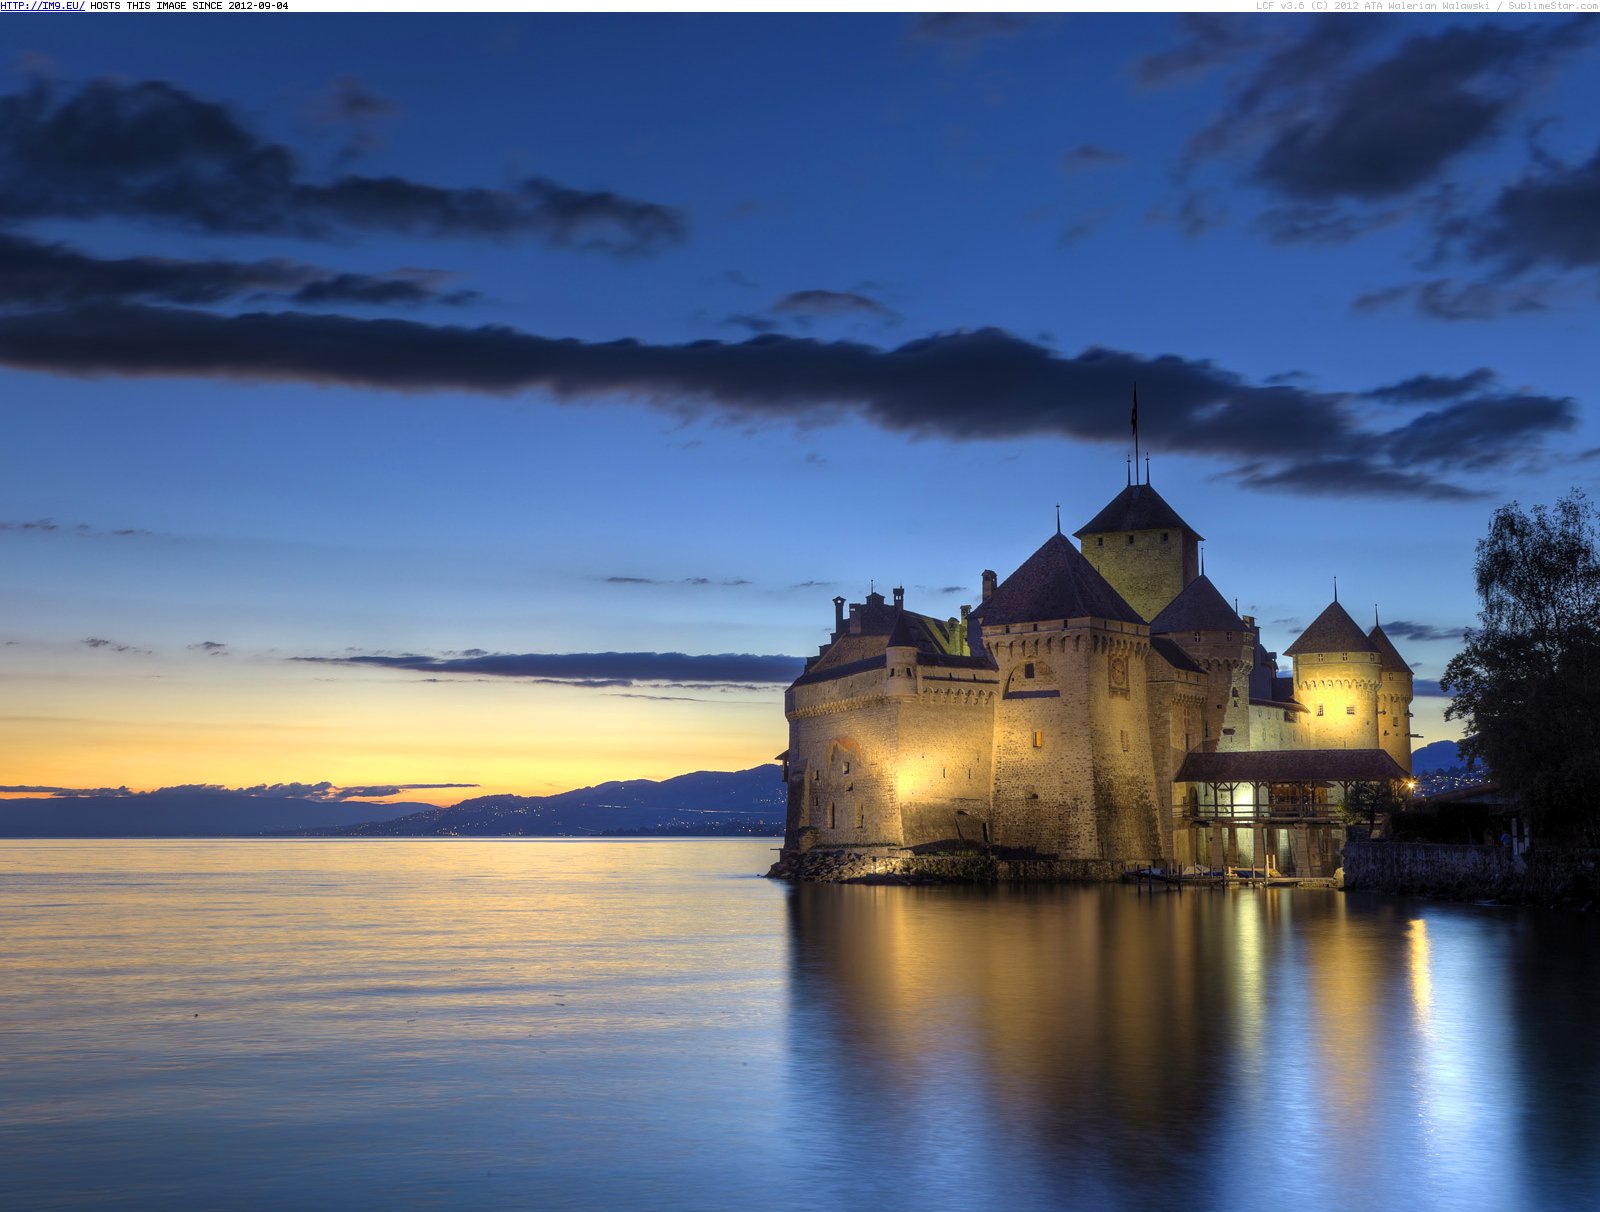 Chateau de Chillon, Montreaux, Switzerland (in Beautiful photos and wallpapers)